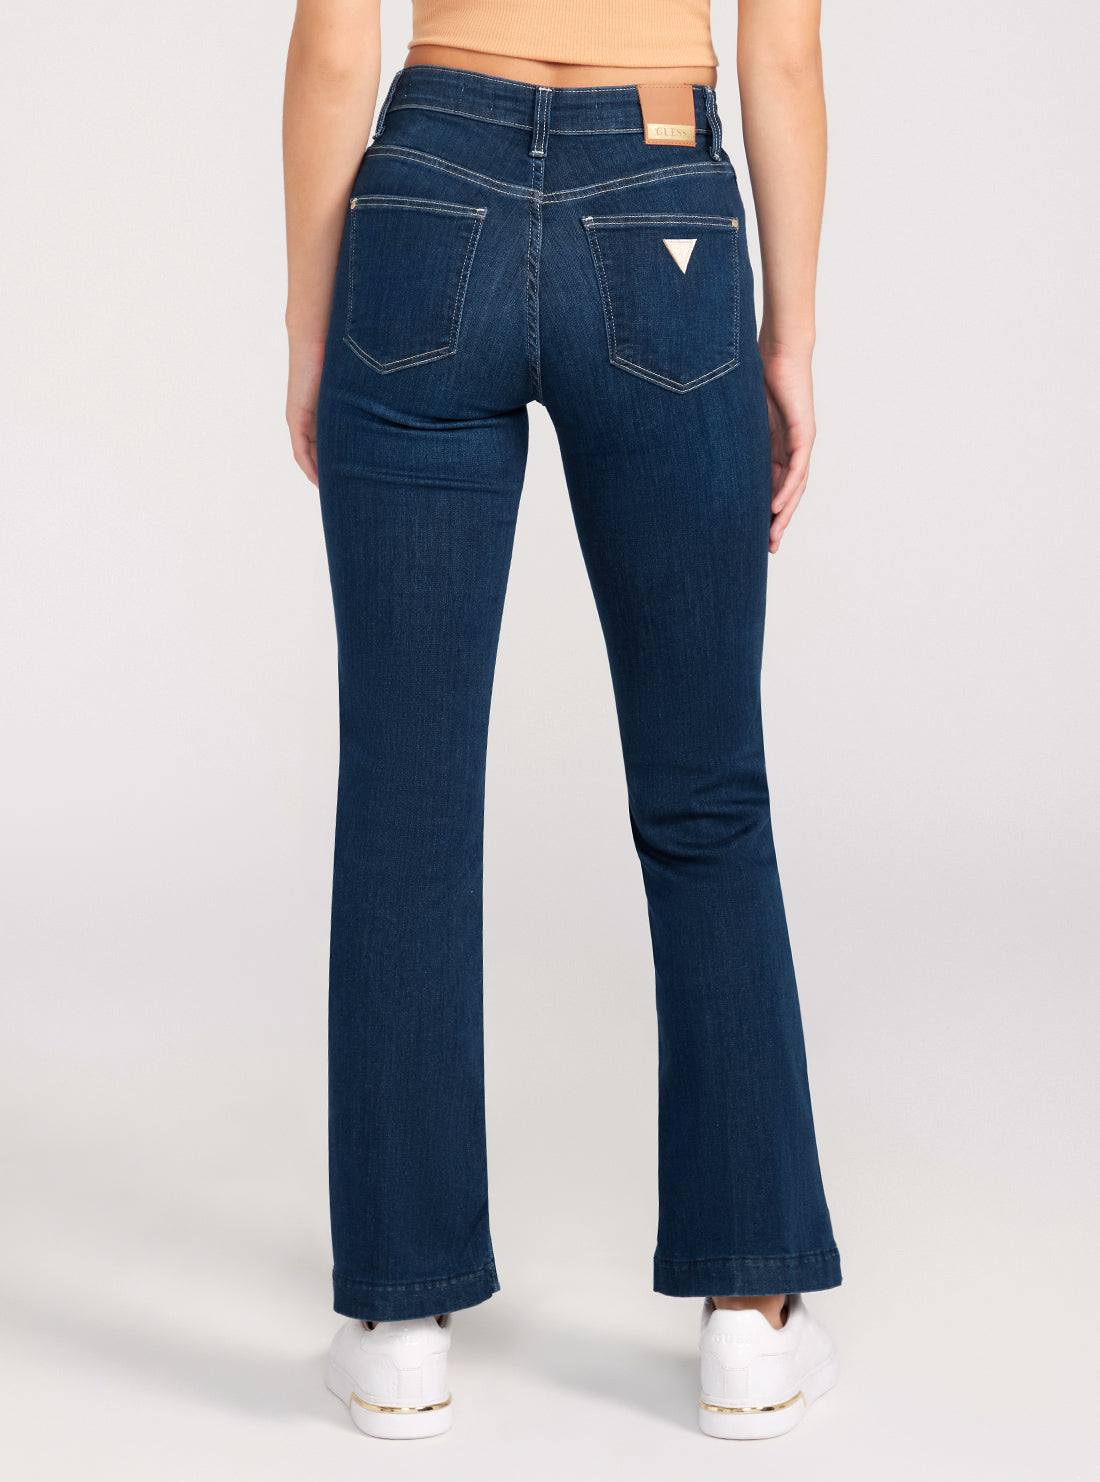 GUESS Mid-Rise Sexy Bootleg Cut Denim Jeans In Dark Wash back view